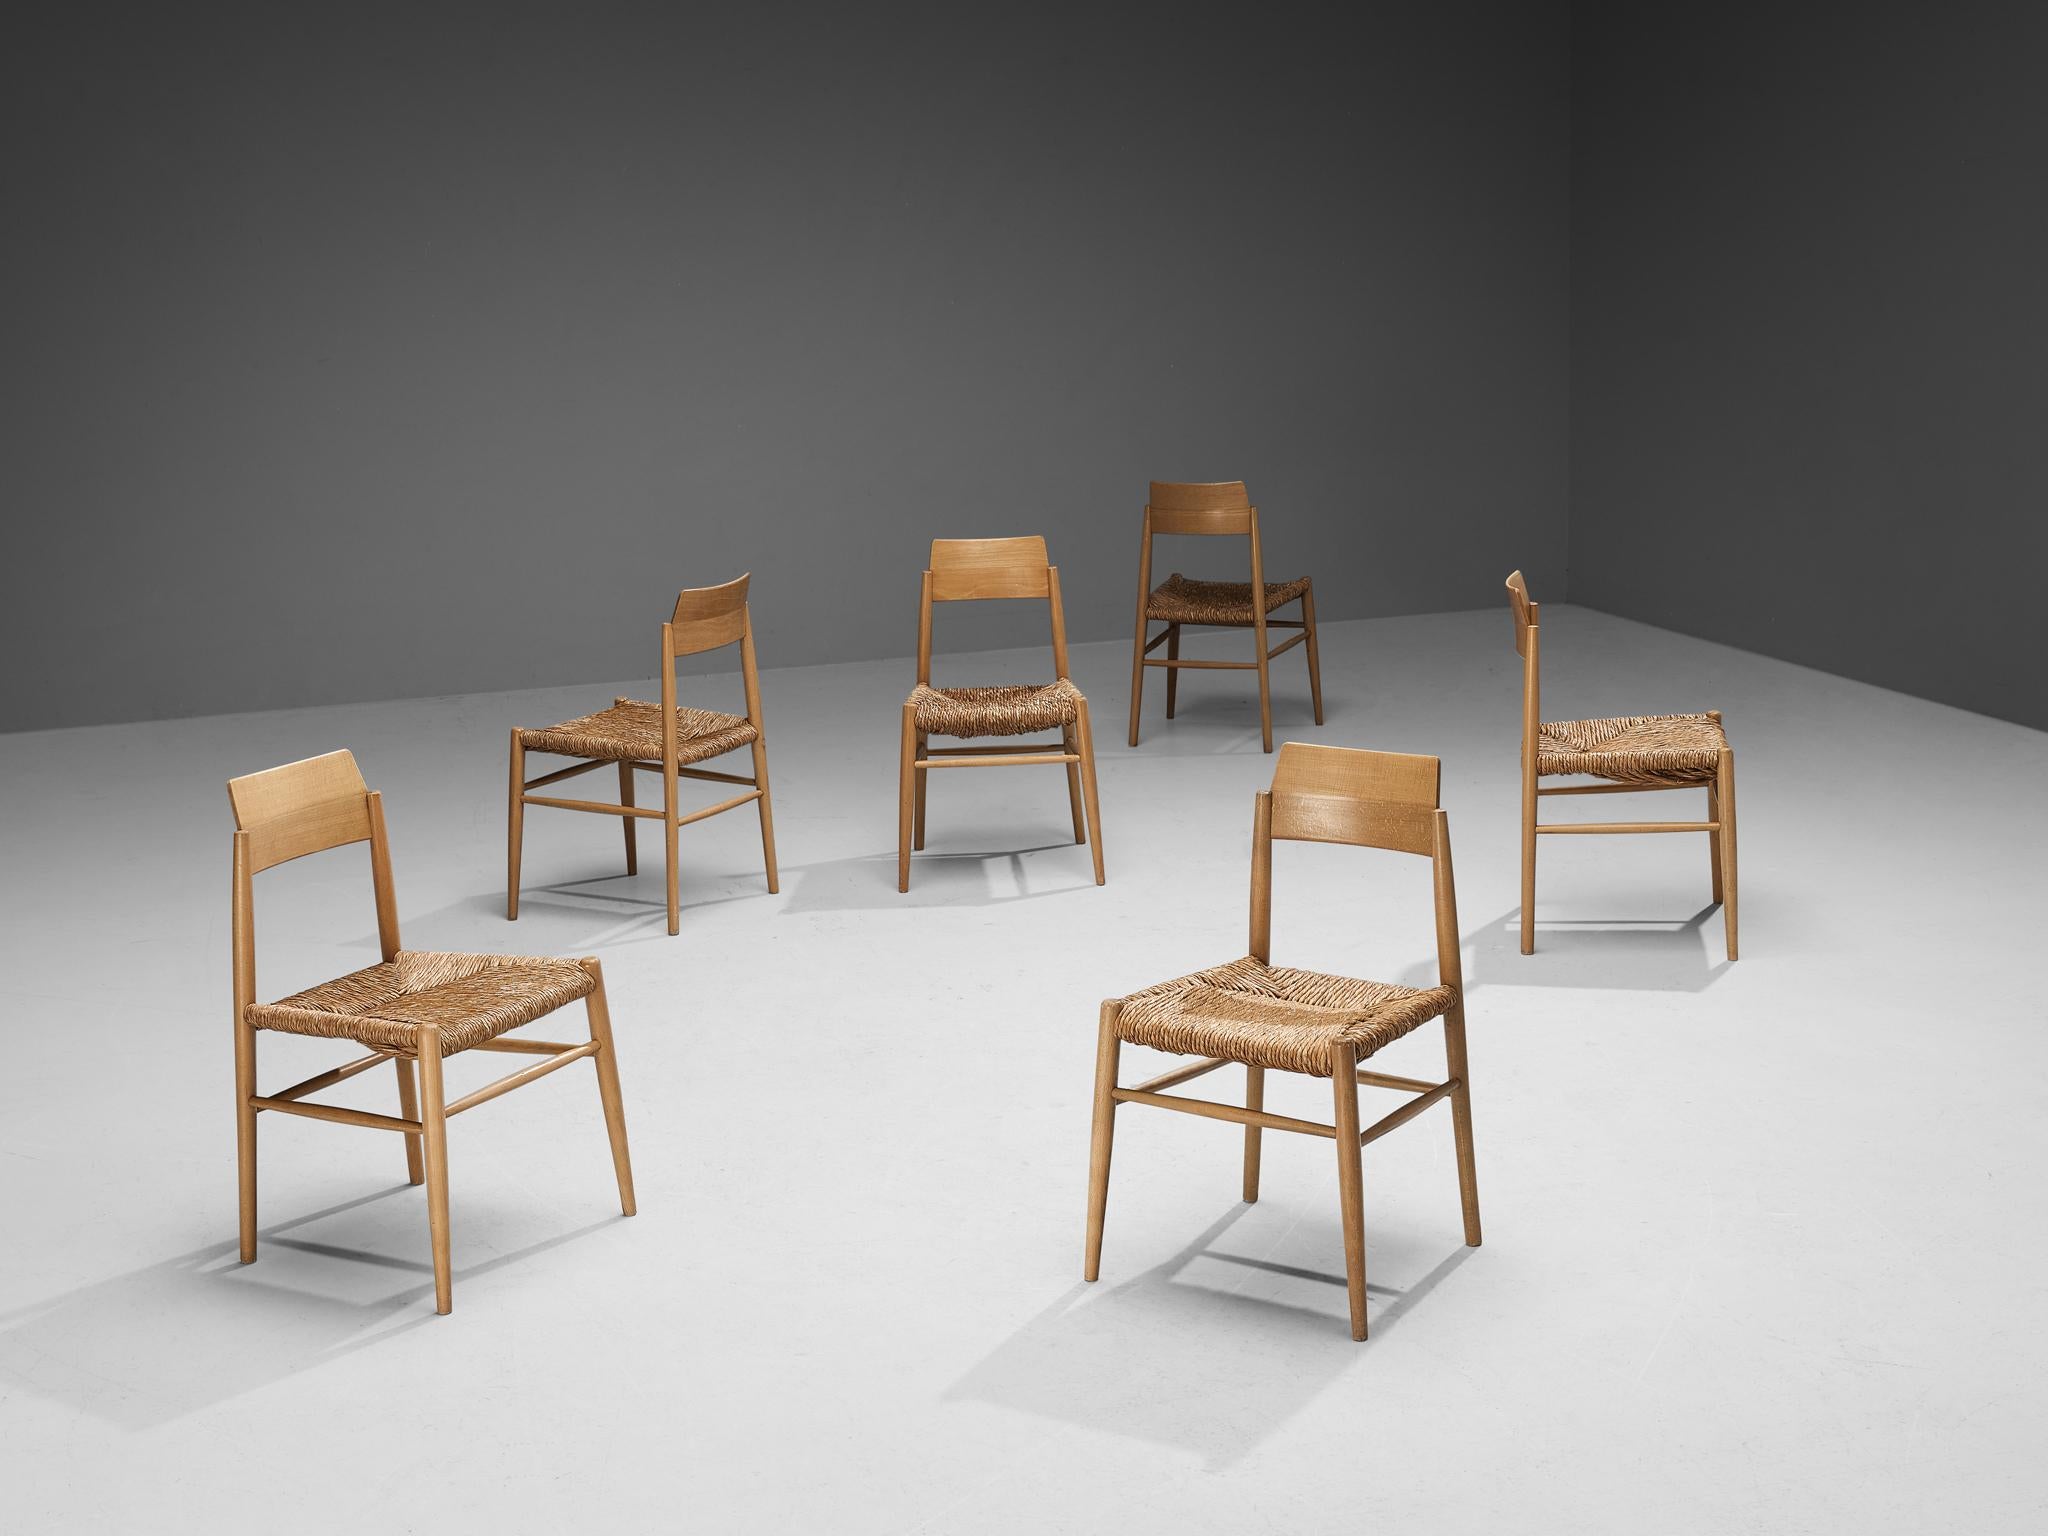 Set of six dining chairs, beech, straw, France, 1960s

Set of six beautiful French dining chairs executed in beech and straw. The design of these chairs is interesting because of the sleek and modern looks of the frames of the items. The straw used